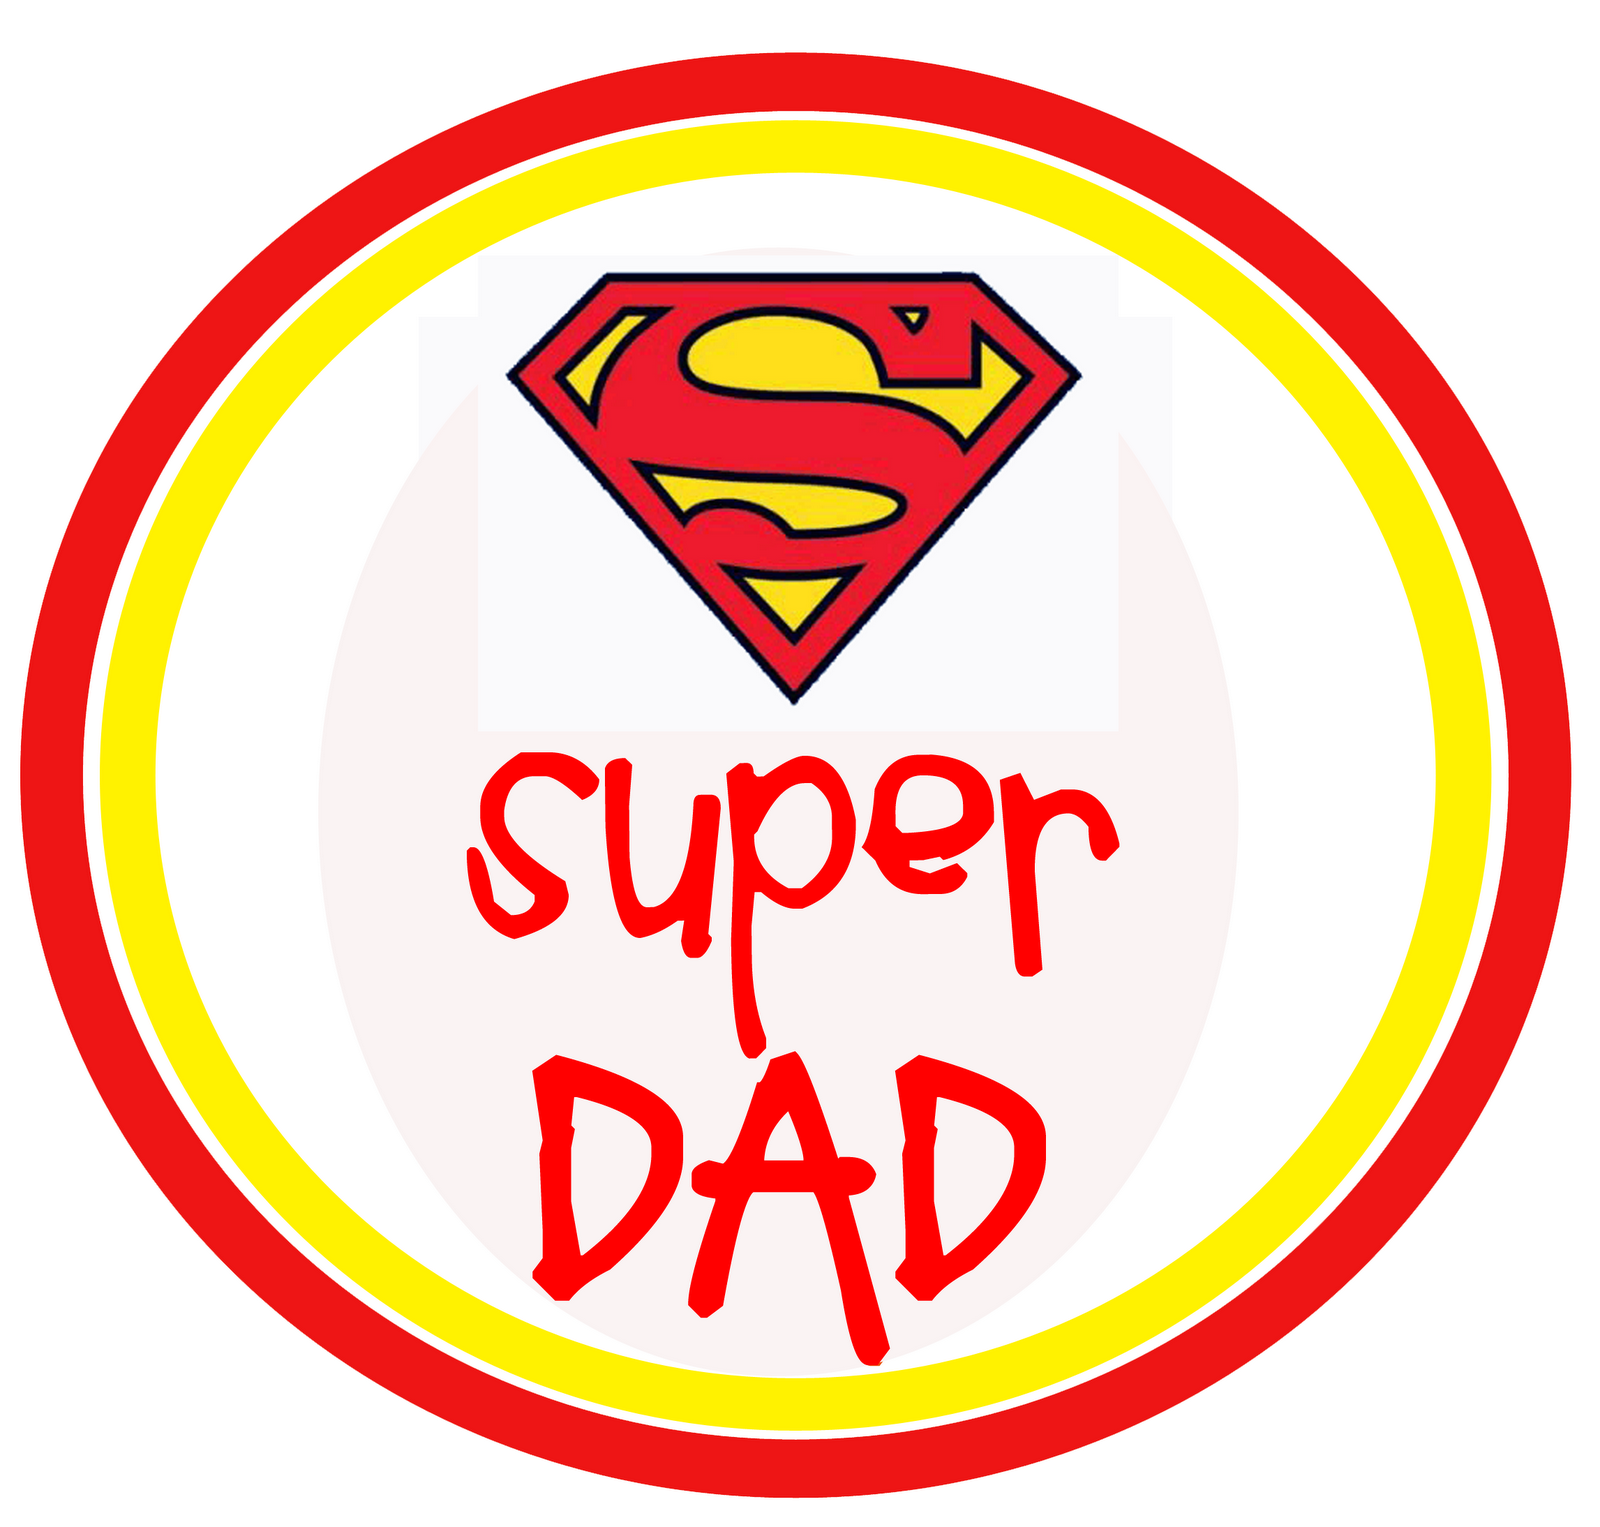 Fathers day free clip art father day clipart image #16379